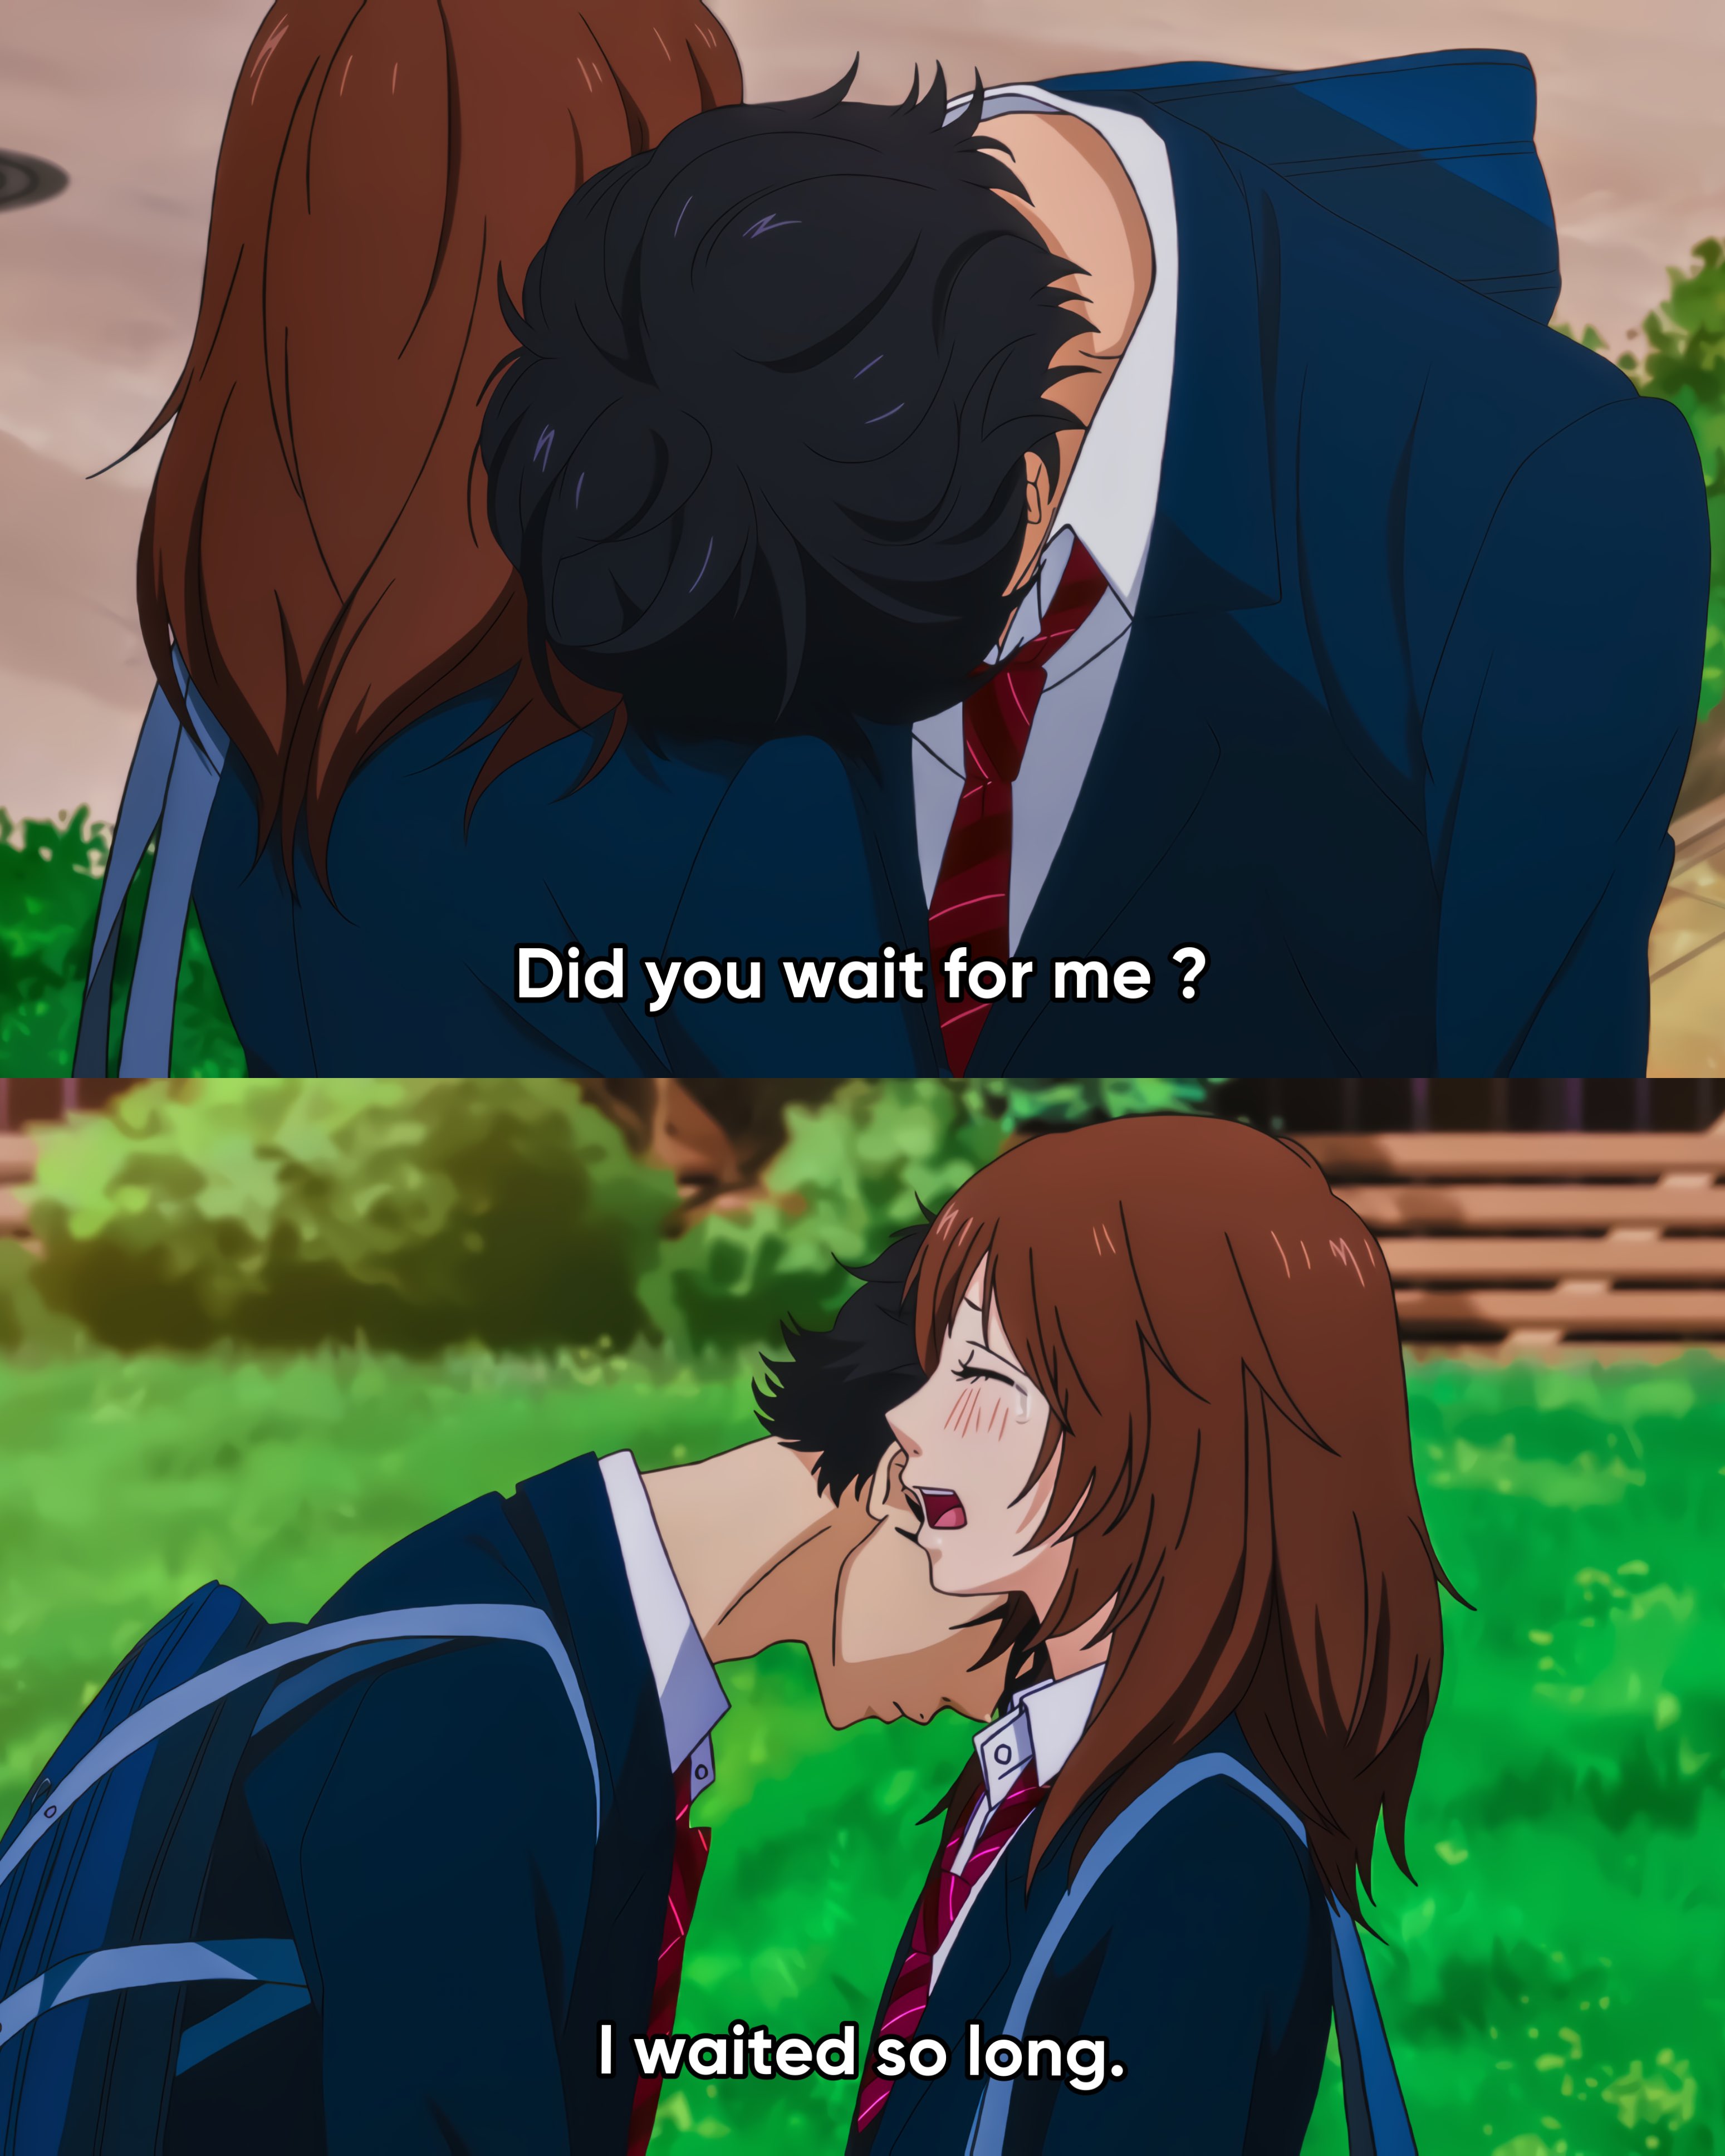 aesthetic content on X: Anime : Ao Haru Ride